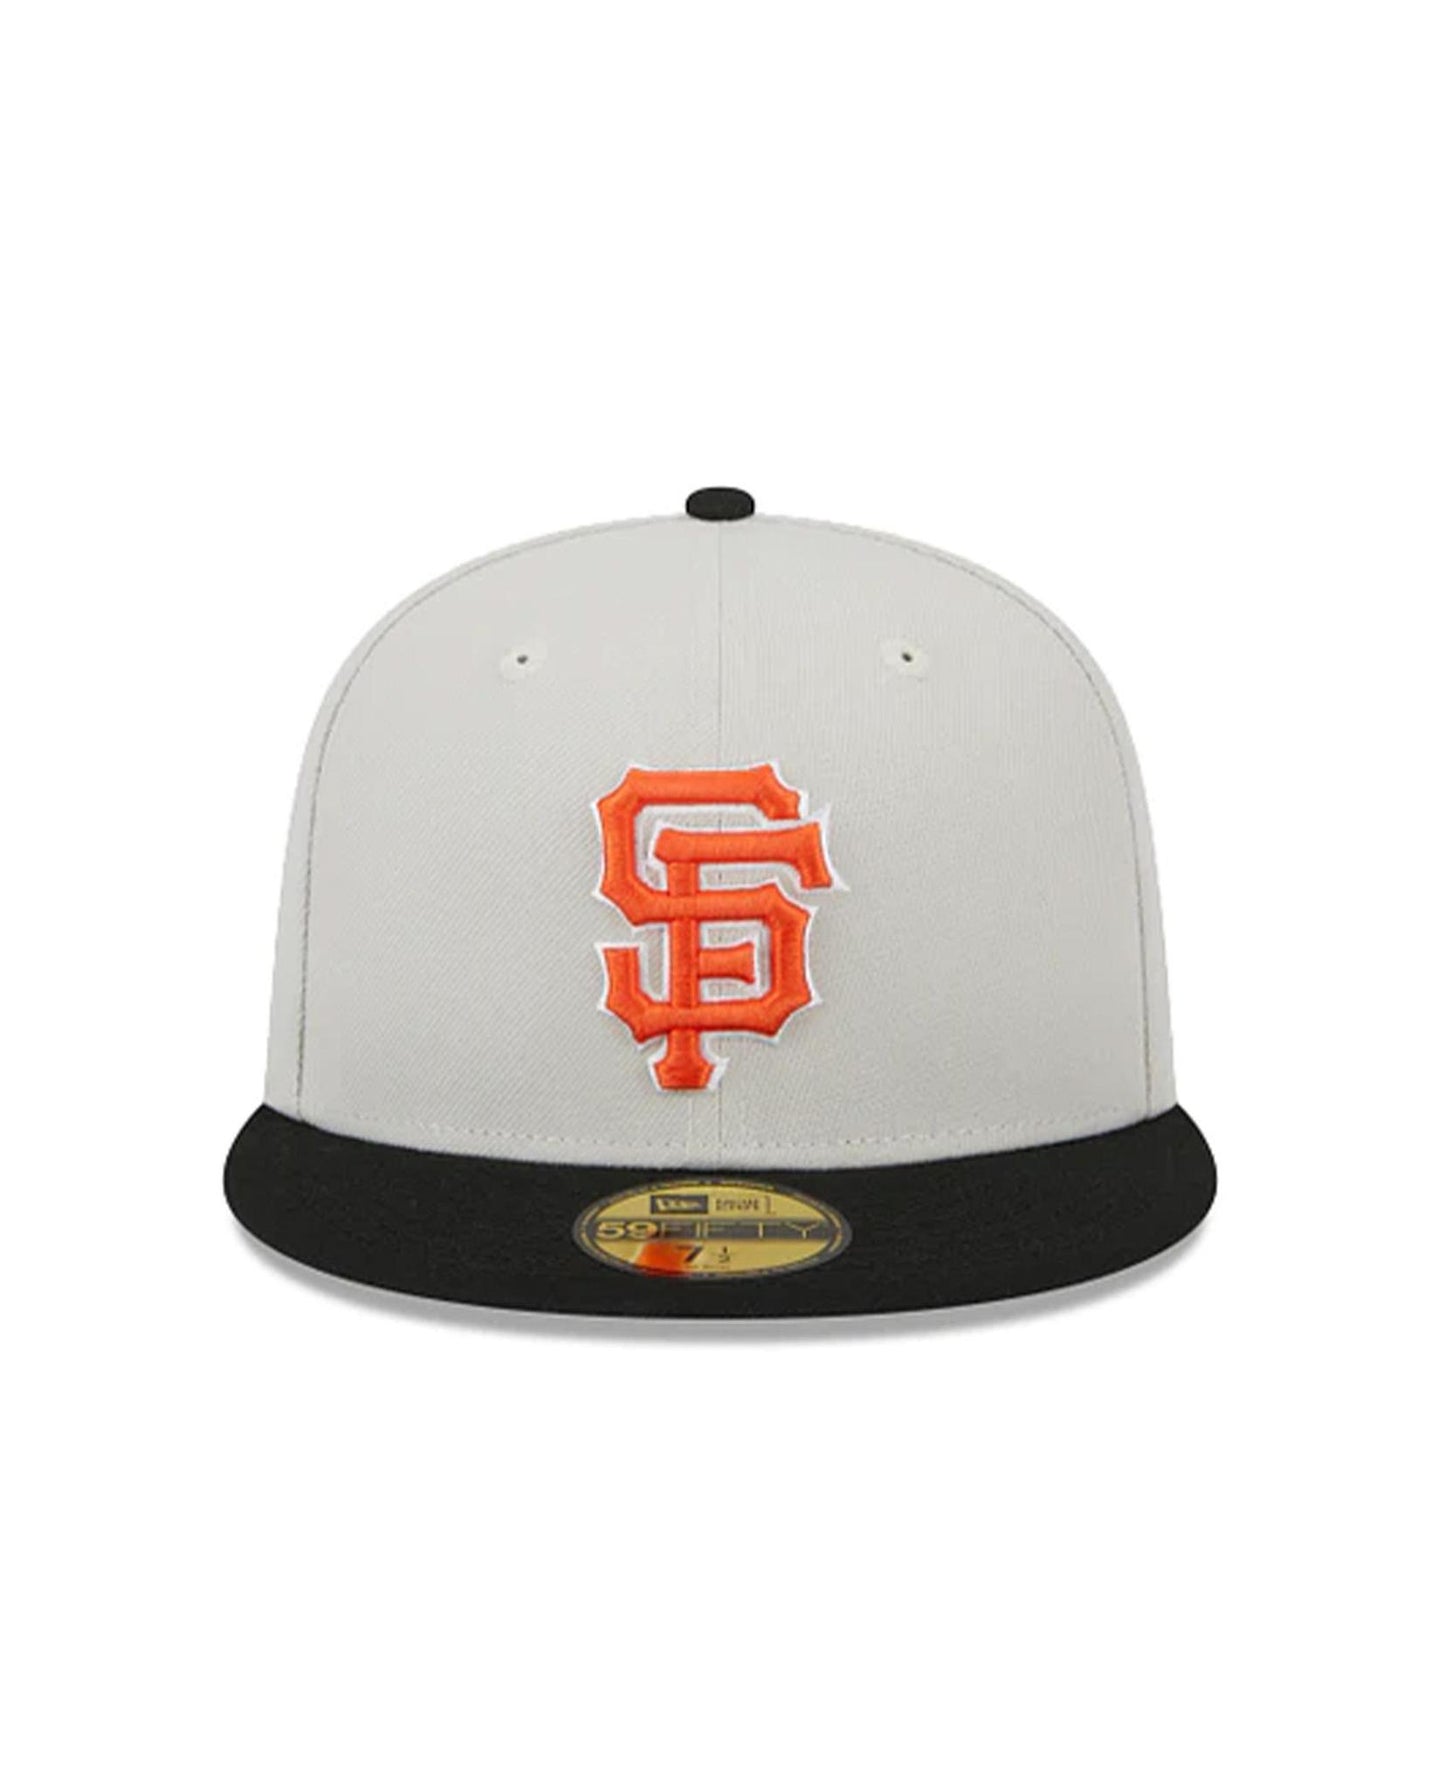 New Era San Francisco Giants 59FIFTY Fitted Hat, Black, Size: 7 1/2